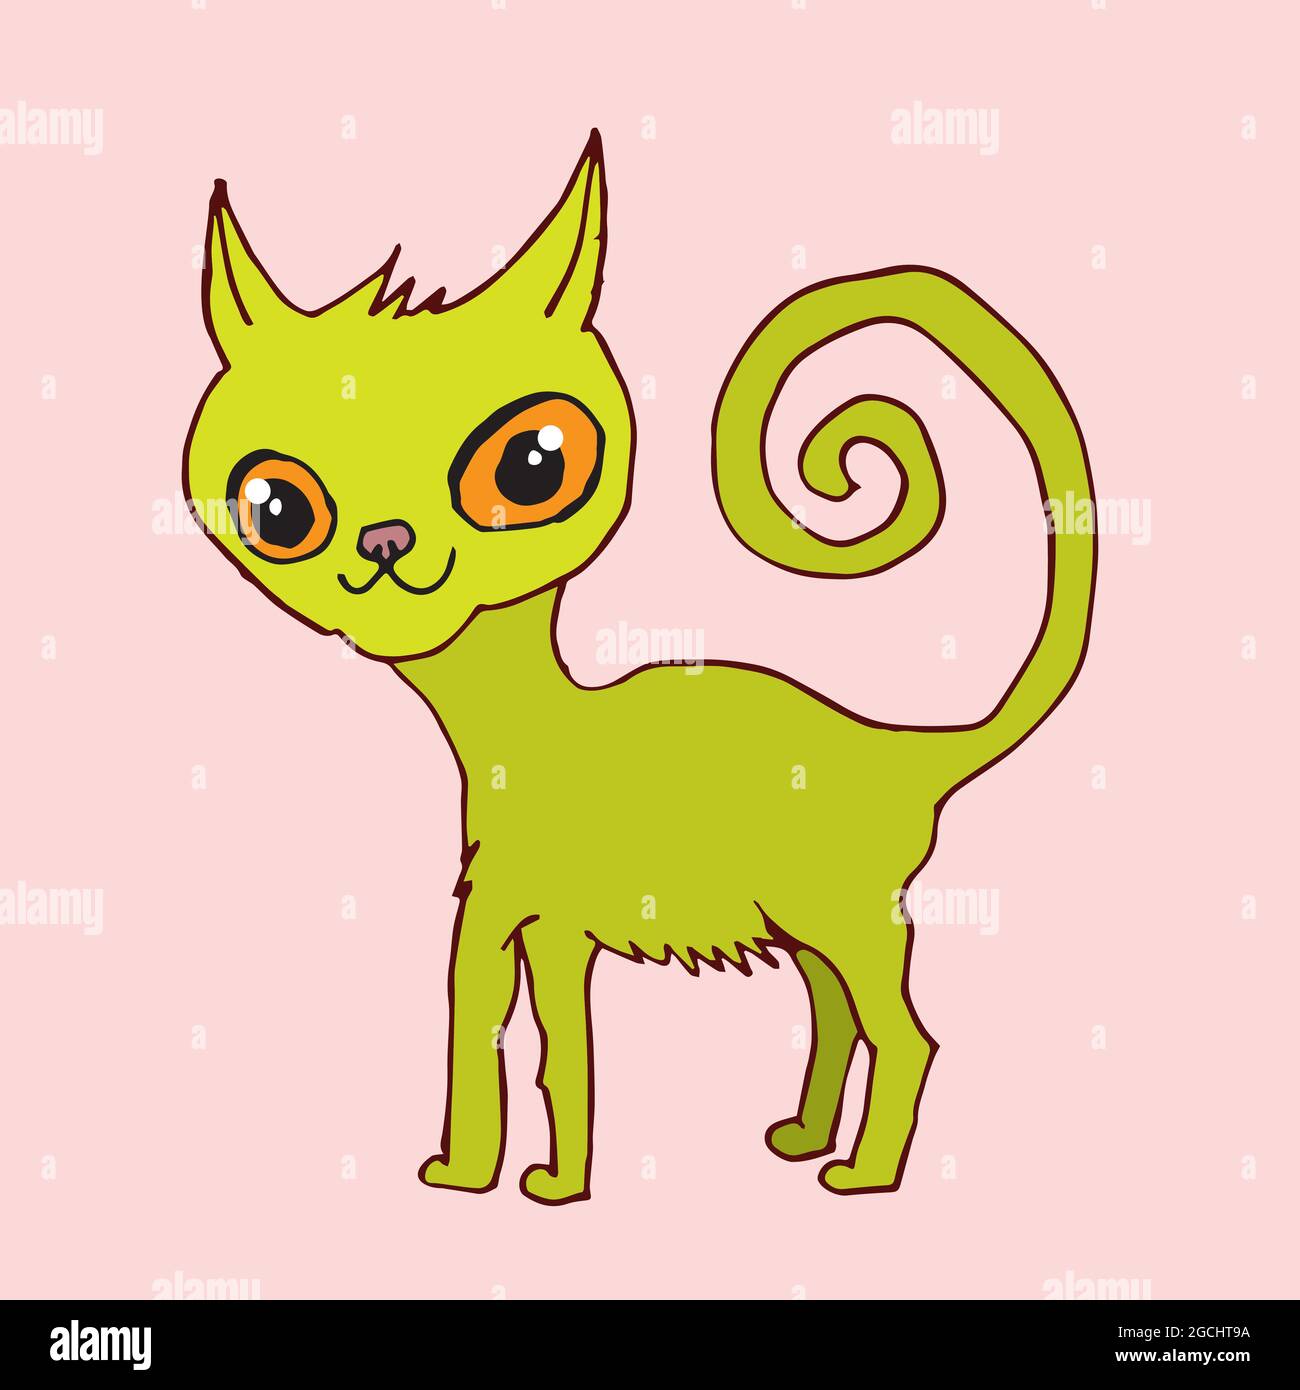 An illustration of a funny green cat. He has big orange eyes and a curly tail. Stock Vector